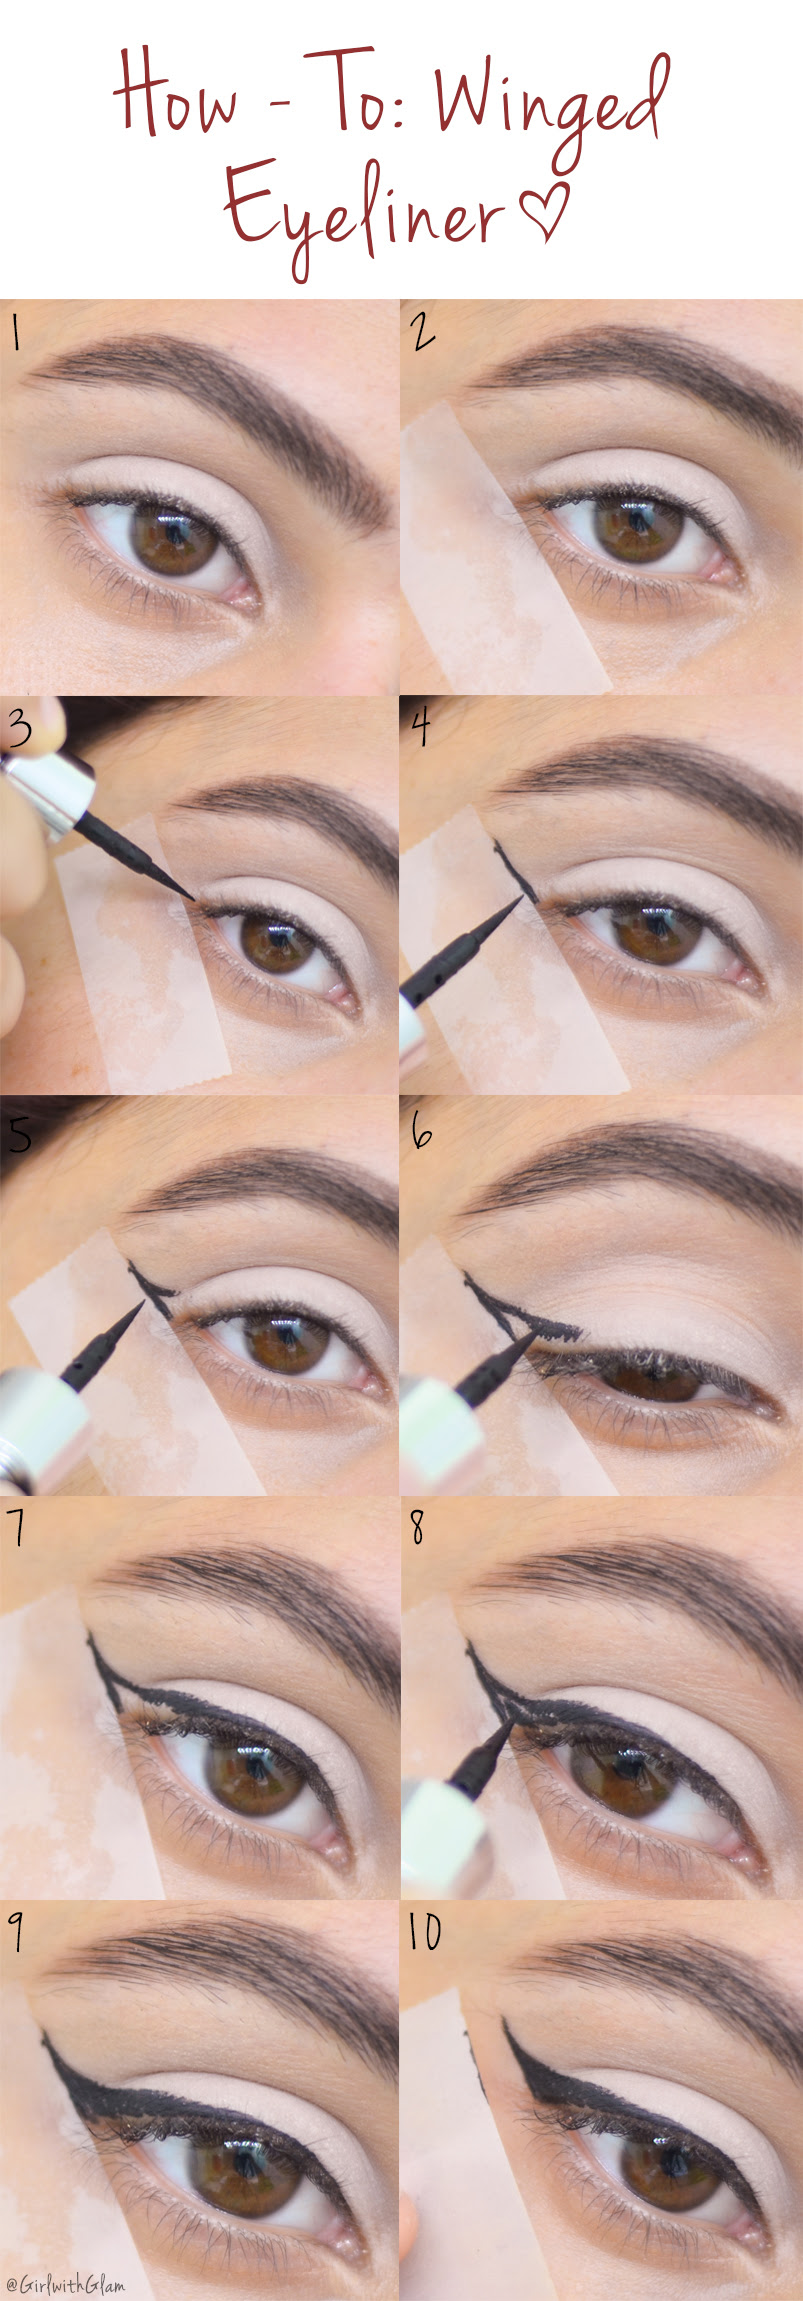 Follow these simple eyeliner tricks by maybelline for the perfect winged for instant smokey eyes, makeup artist grace lee suggests using a gel eyeliner pencil to line eyes, not worrying about creating a perfect line, and. How To Winged Eyeliner Tape Method Girl With Glam